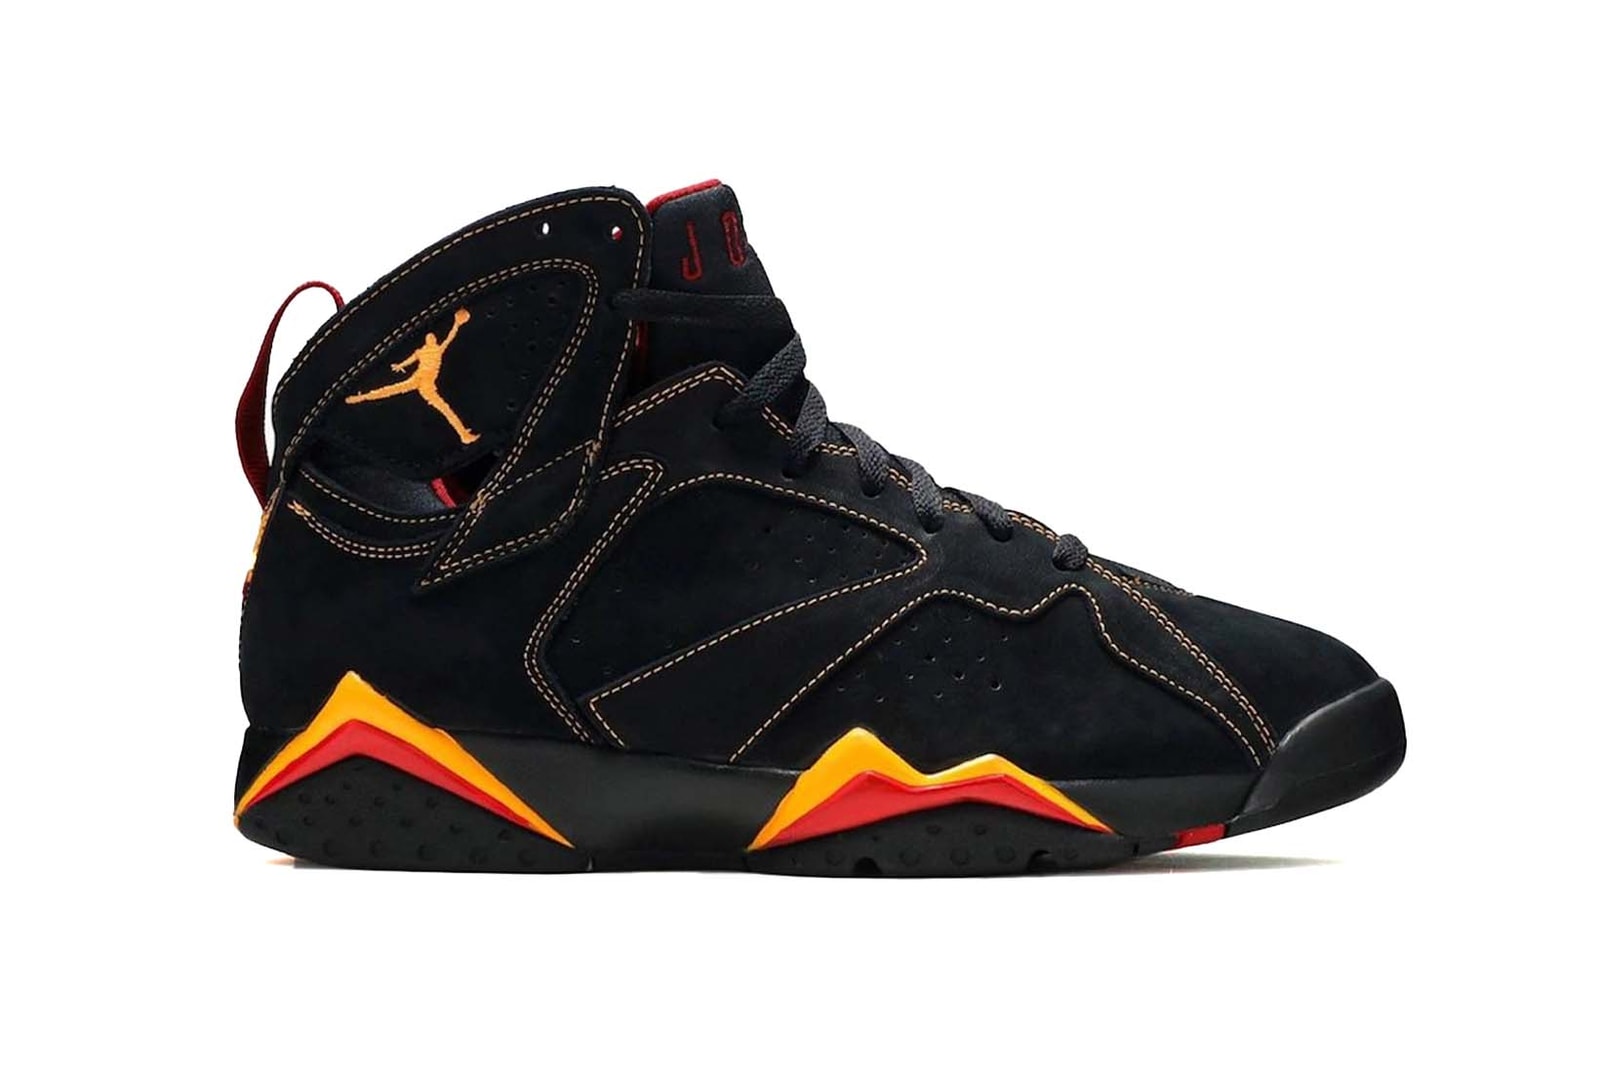 Nike Air Jordan Fall 2022 Collection Citrus 7 Black Yellow Red Price Release Date Collaboration